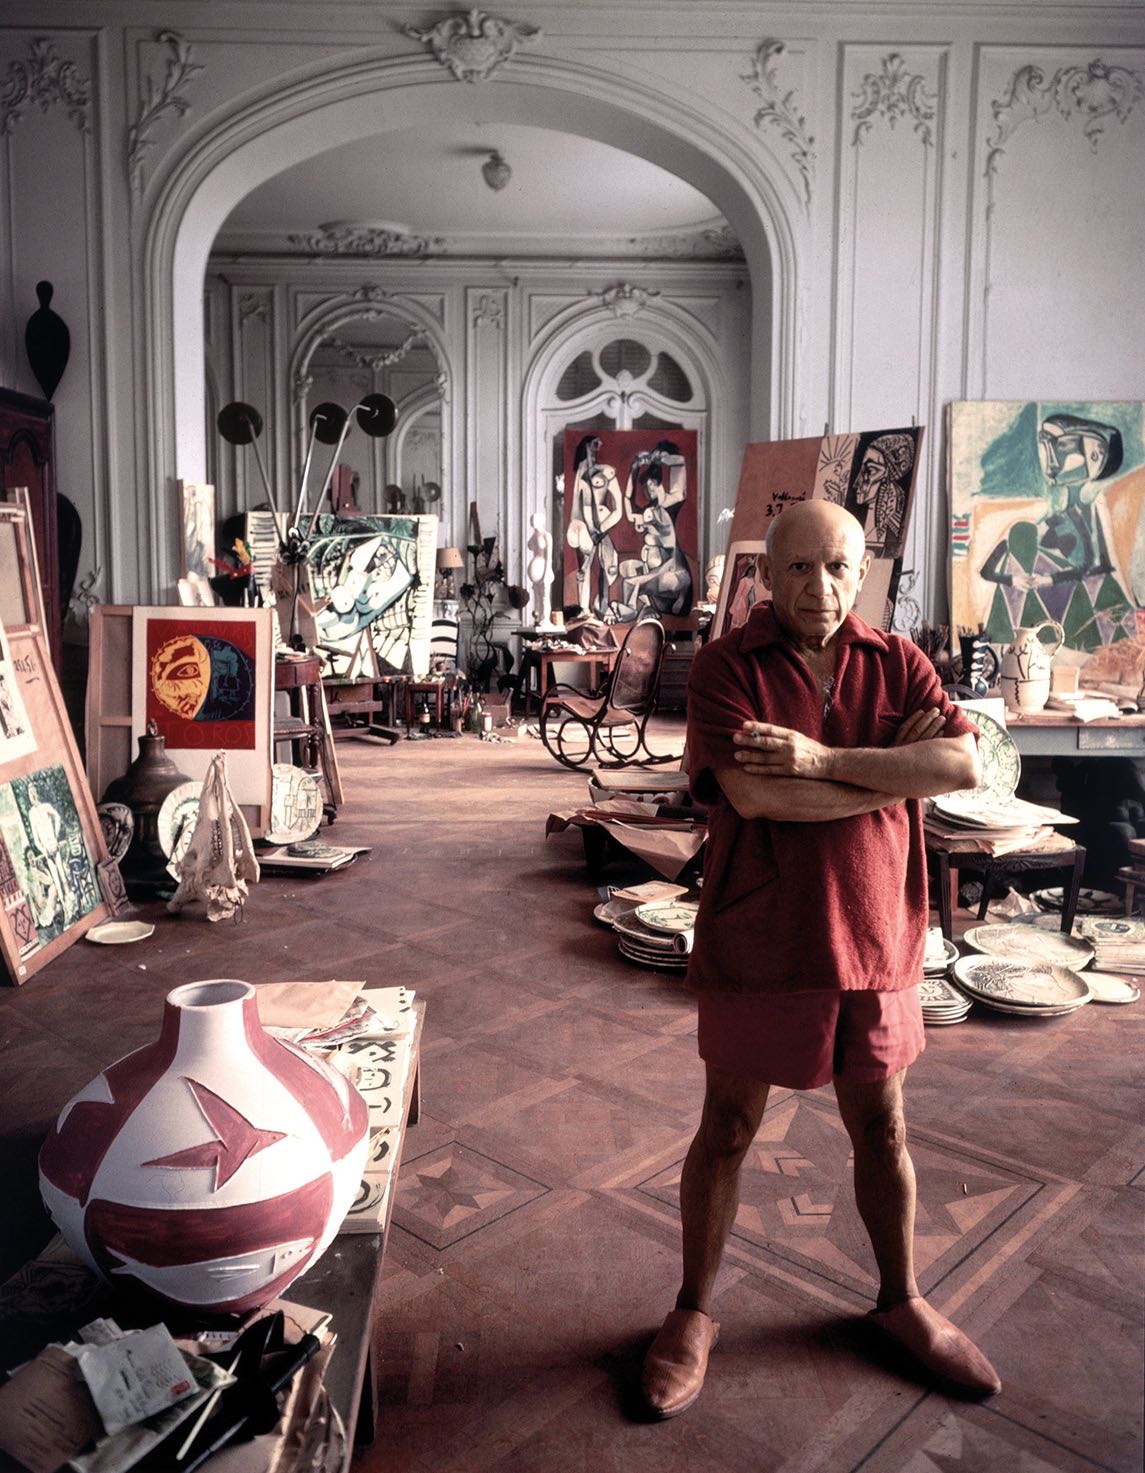 Portrait of artist Pablo Picasso September 11, 1956 in Cannes, France